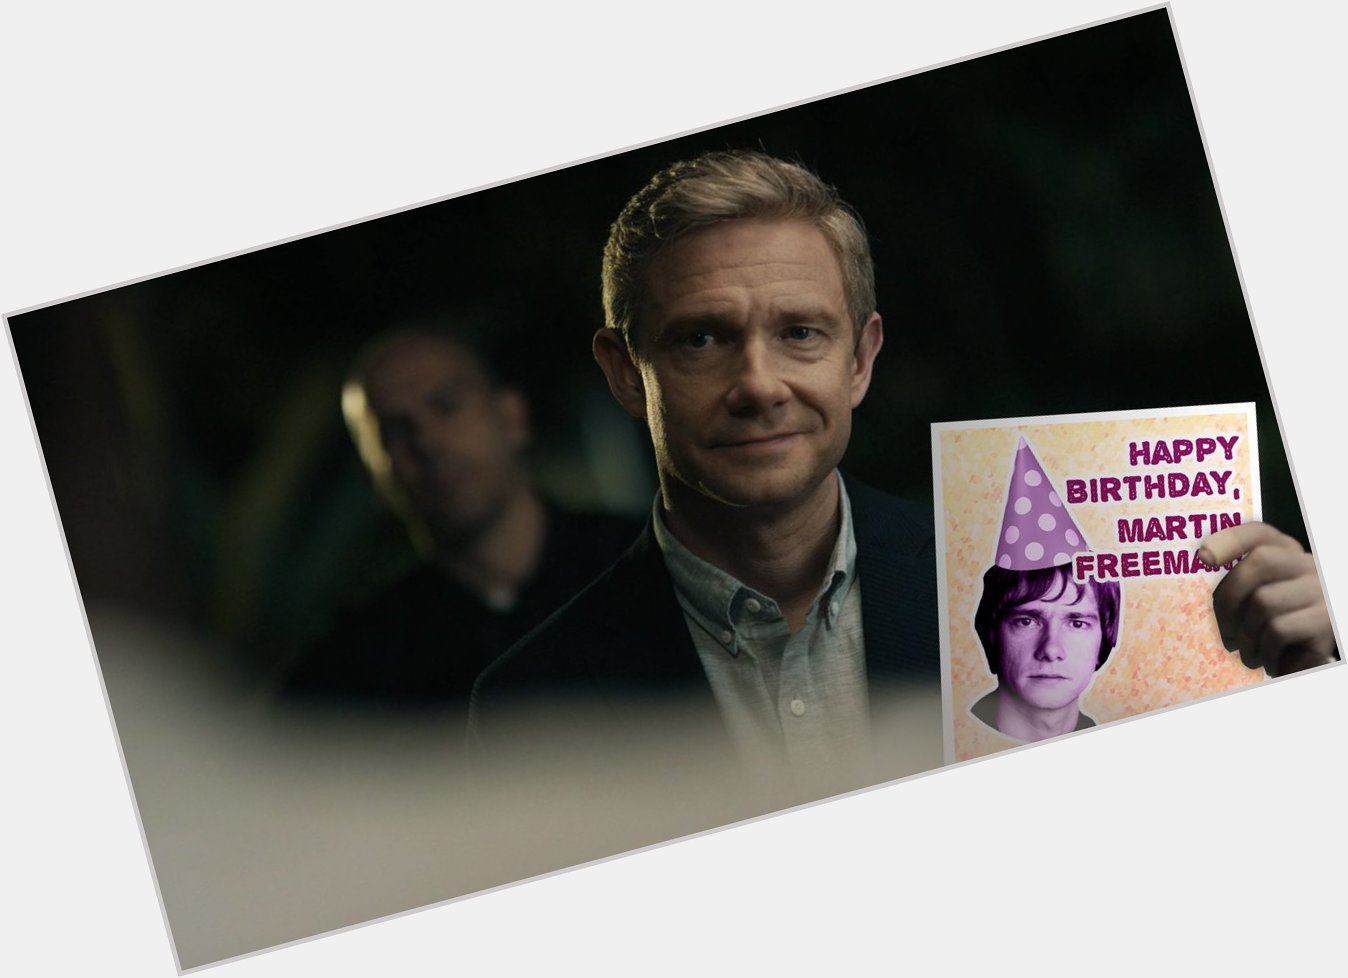 Happy Birthday Martin Freeman, we\re glad you liked the card. 